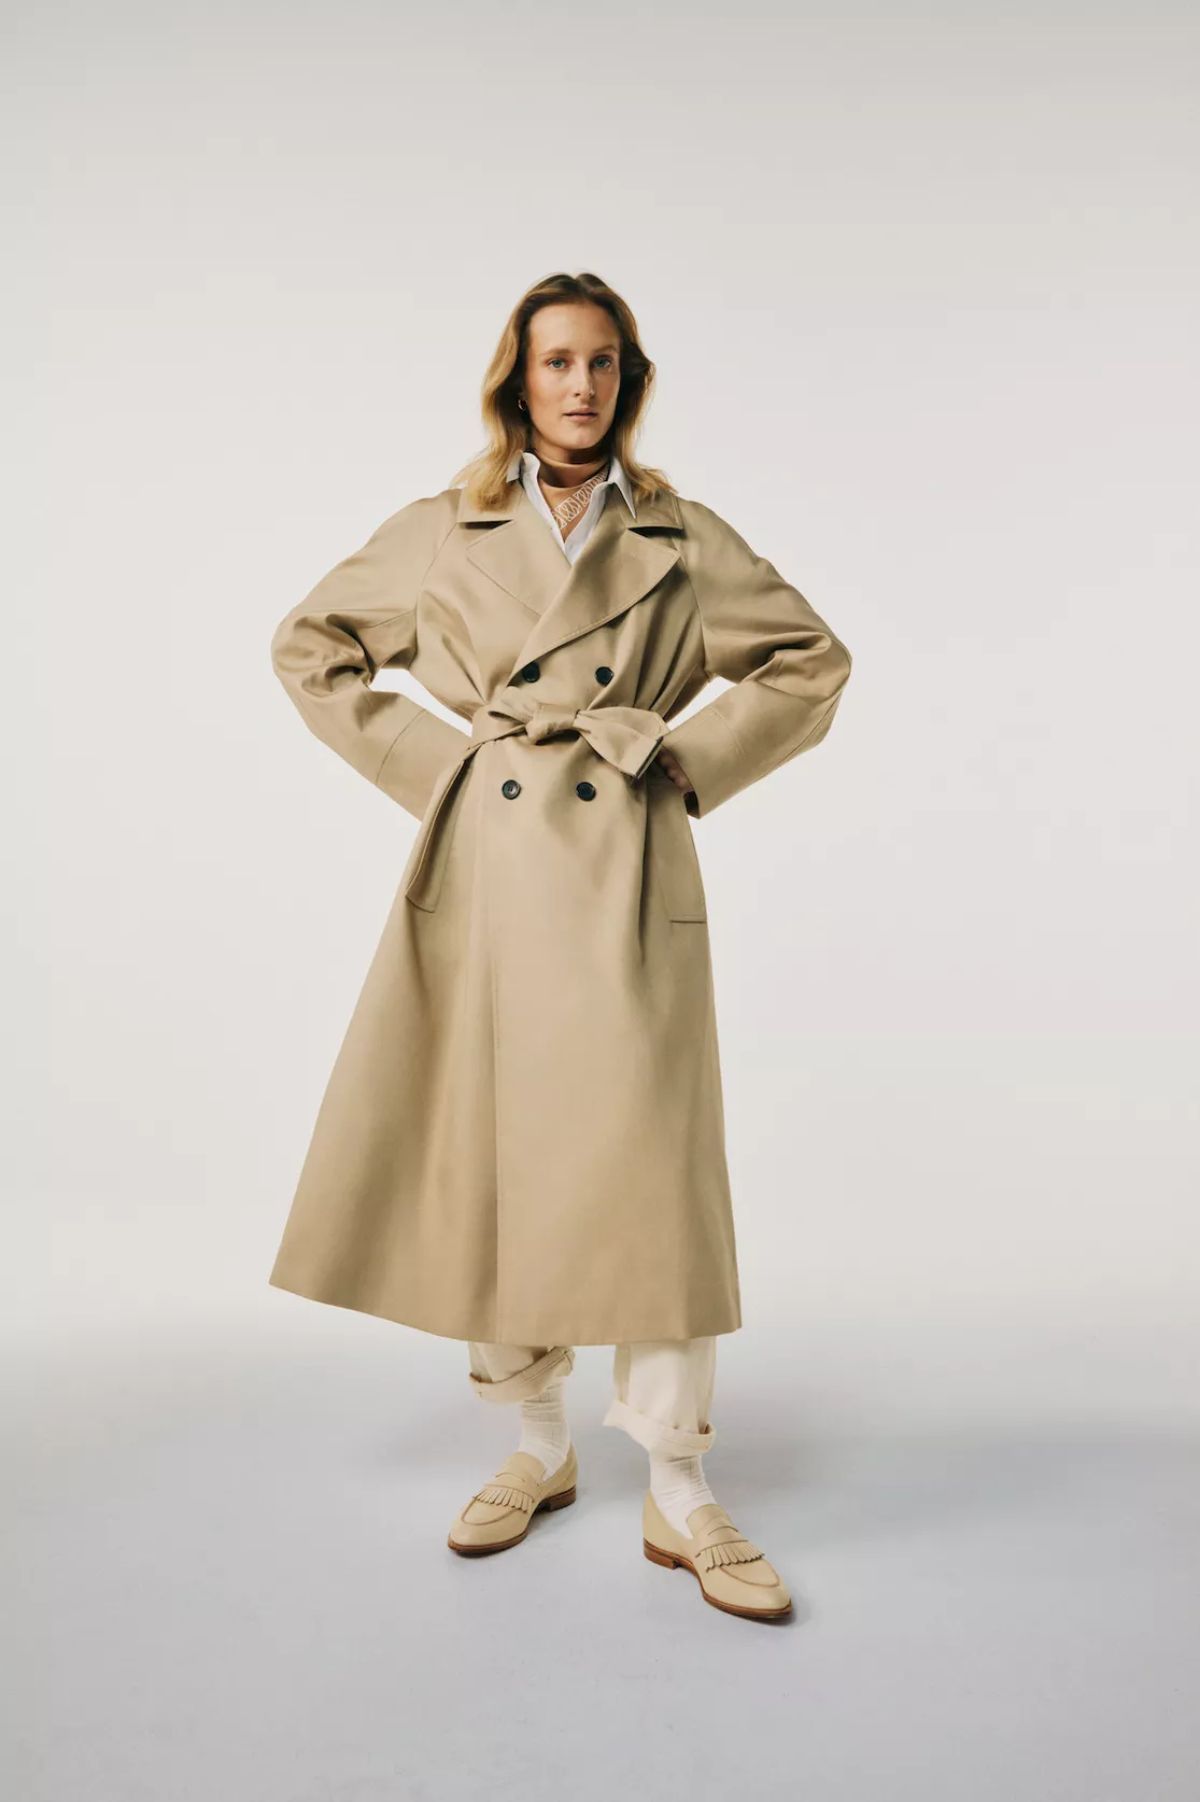 Olympia Campbell wears Connolly Beige Trench Coat, WARDROBE.NYC White Shirt, Raey Off-White Jeans, Crockett & Jones Shoes Wardrobe Foundations Matches Fashion